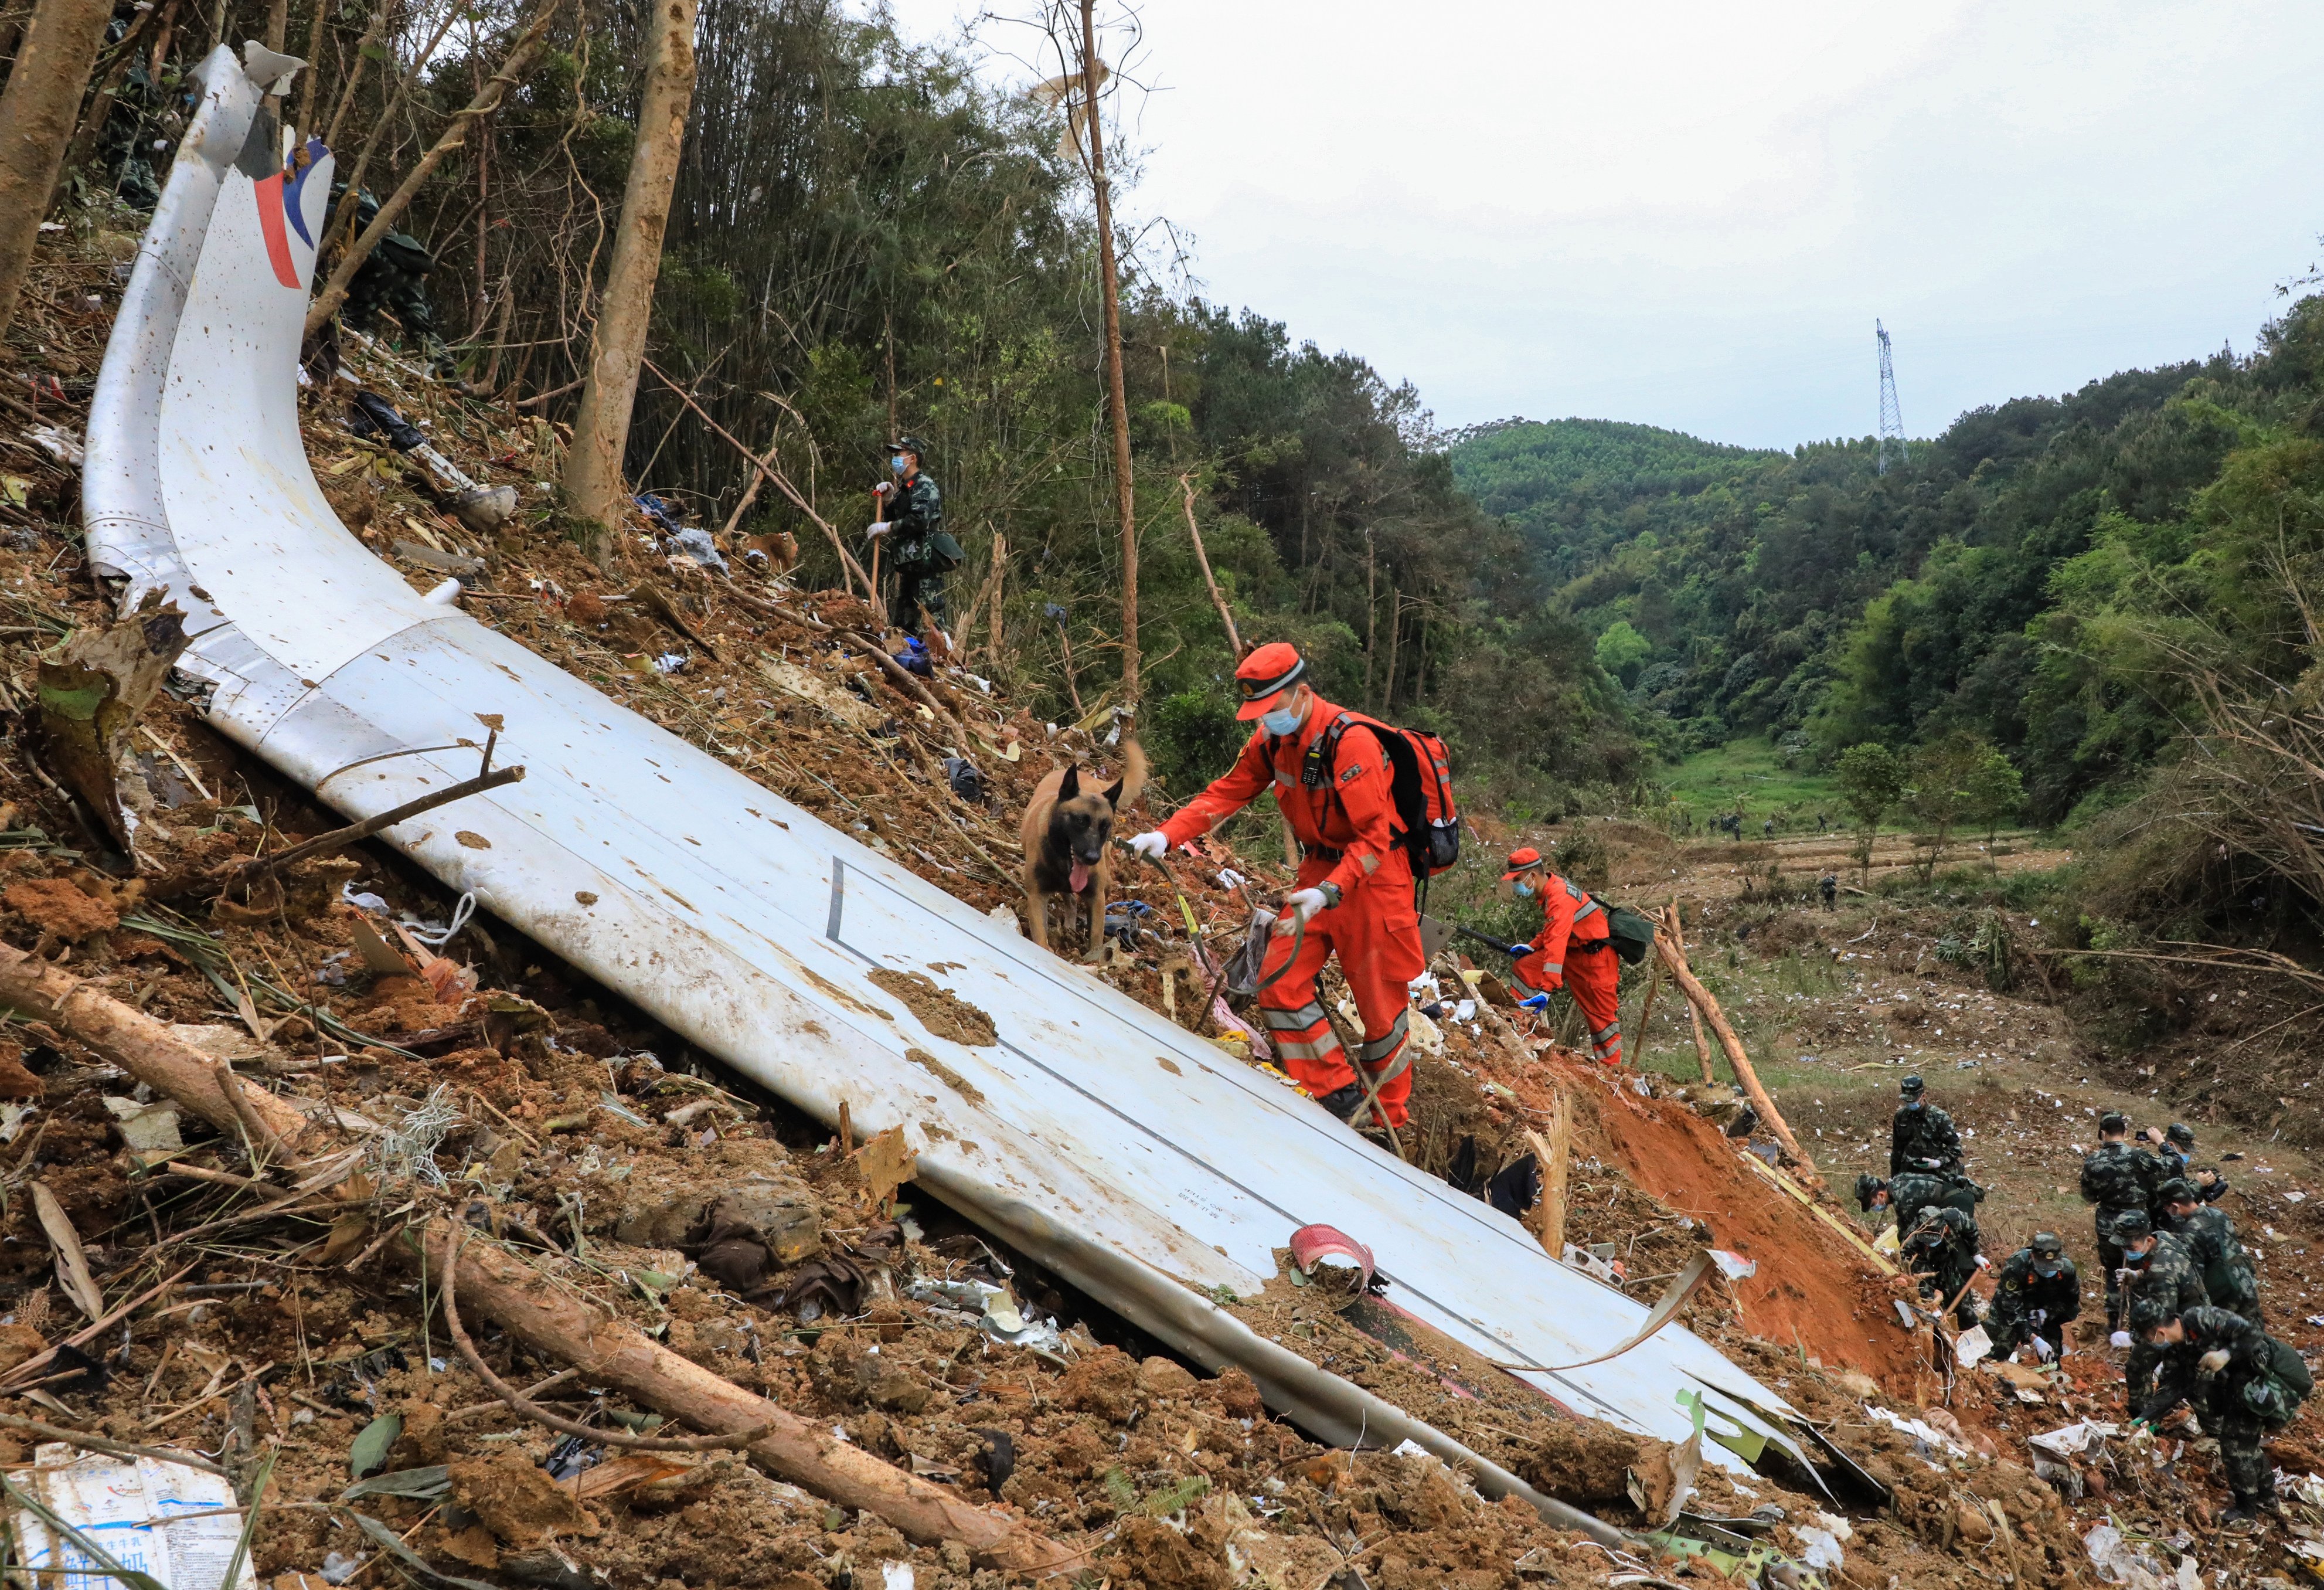 On March 24, rescuers search for the black boxes at the plane crash site in Tengxian County, south China’s Guangxi Zhuang Autonomous Region, March 22, 2022. The plane carrying 132 people crashed in Tengxian County in the city of Wuzhou. Photo: Xinhua